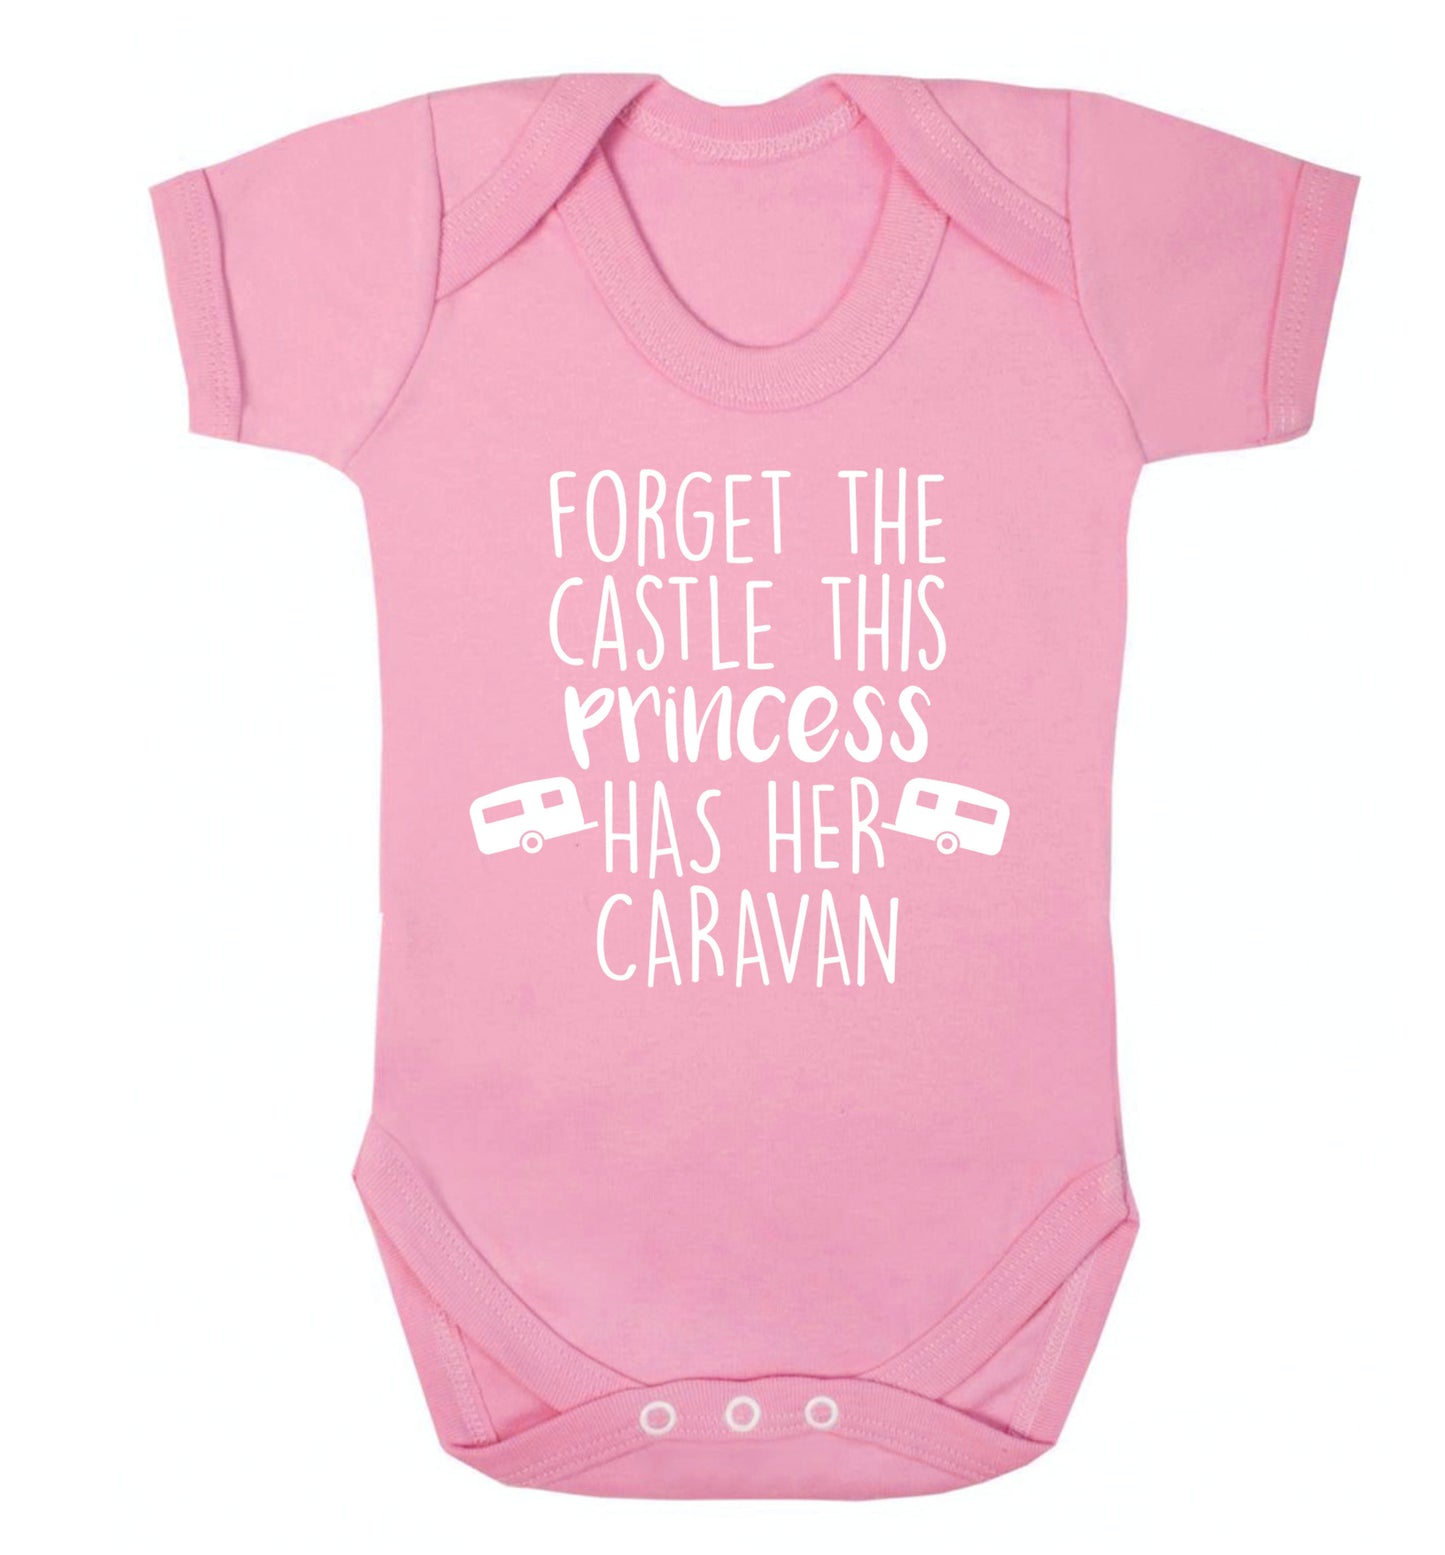 Forget the castle this princess lives at the caravan Baby Vest pale pink 18-24 months